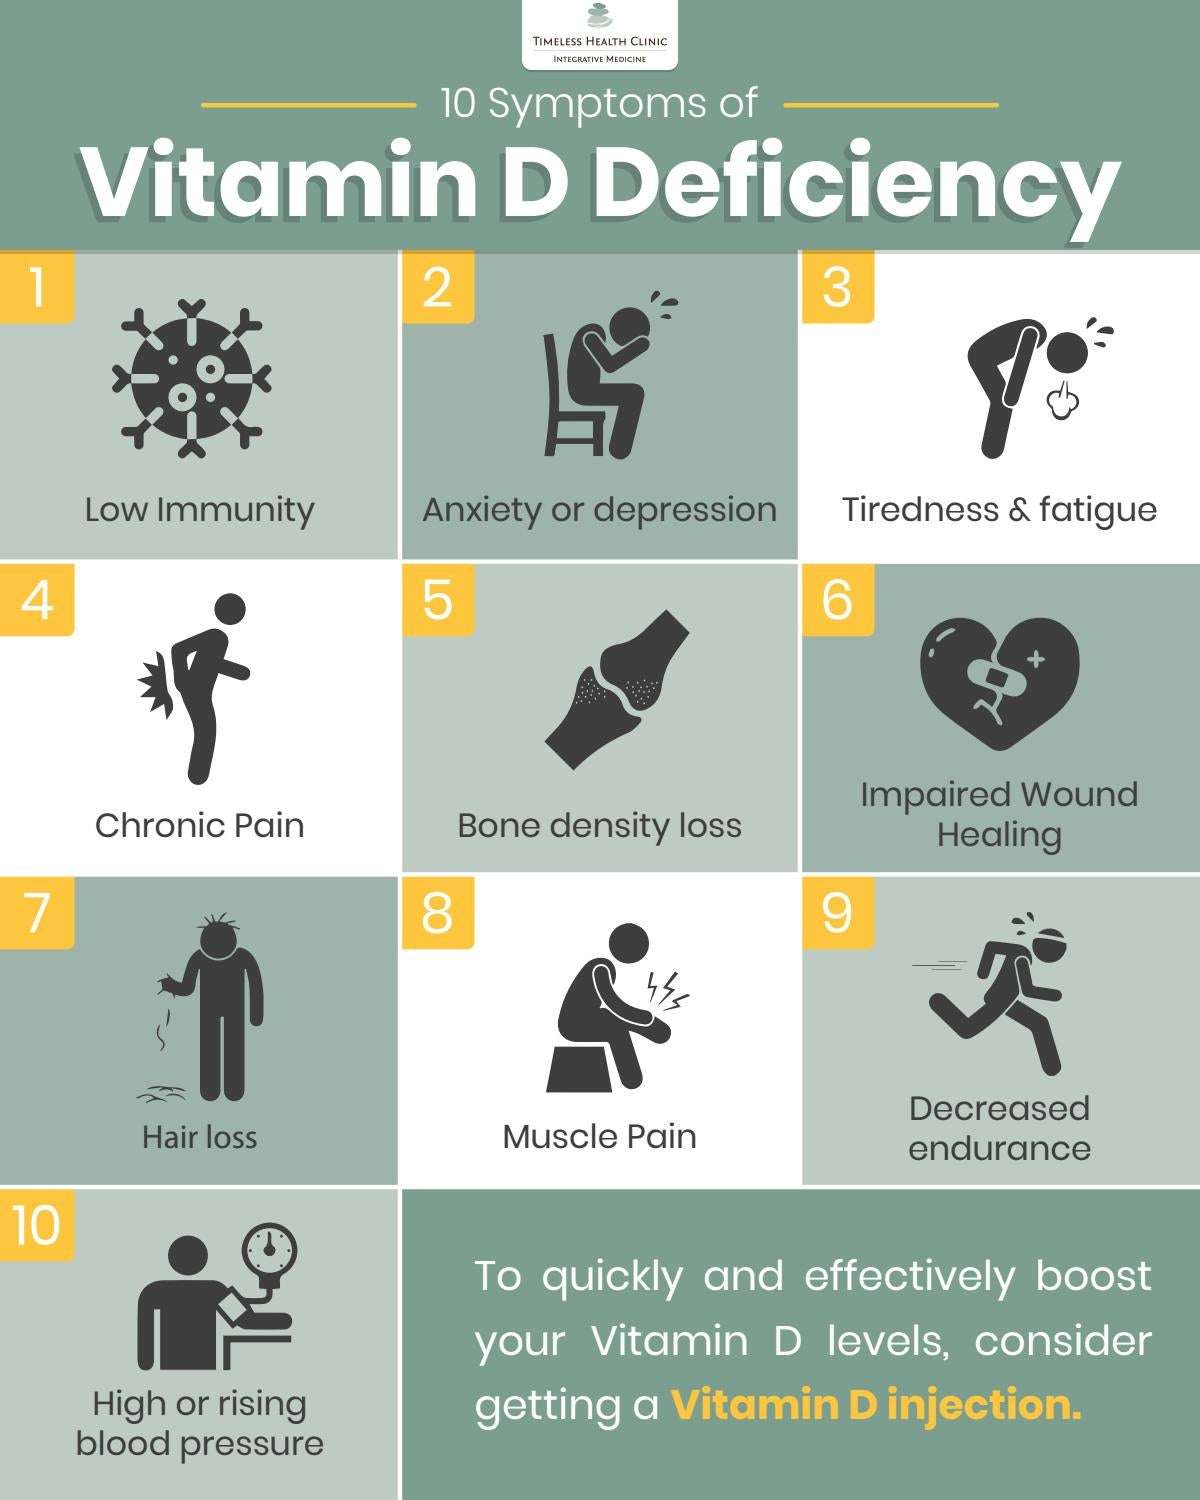 10 Symptoms of Vitamin D Deficiency by Timeless Health Clinic